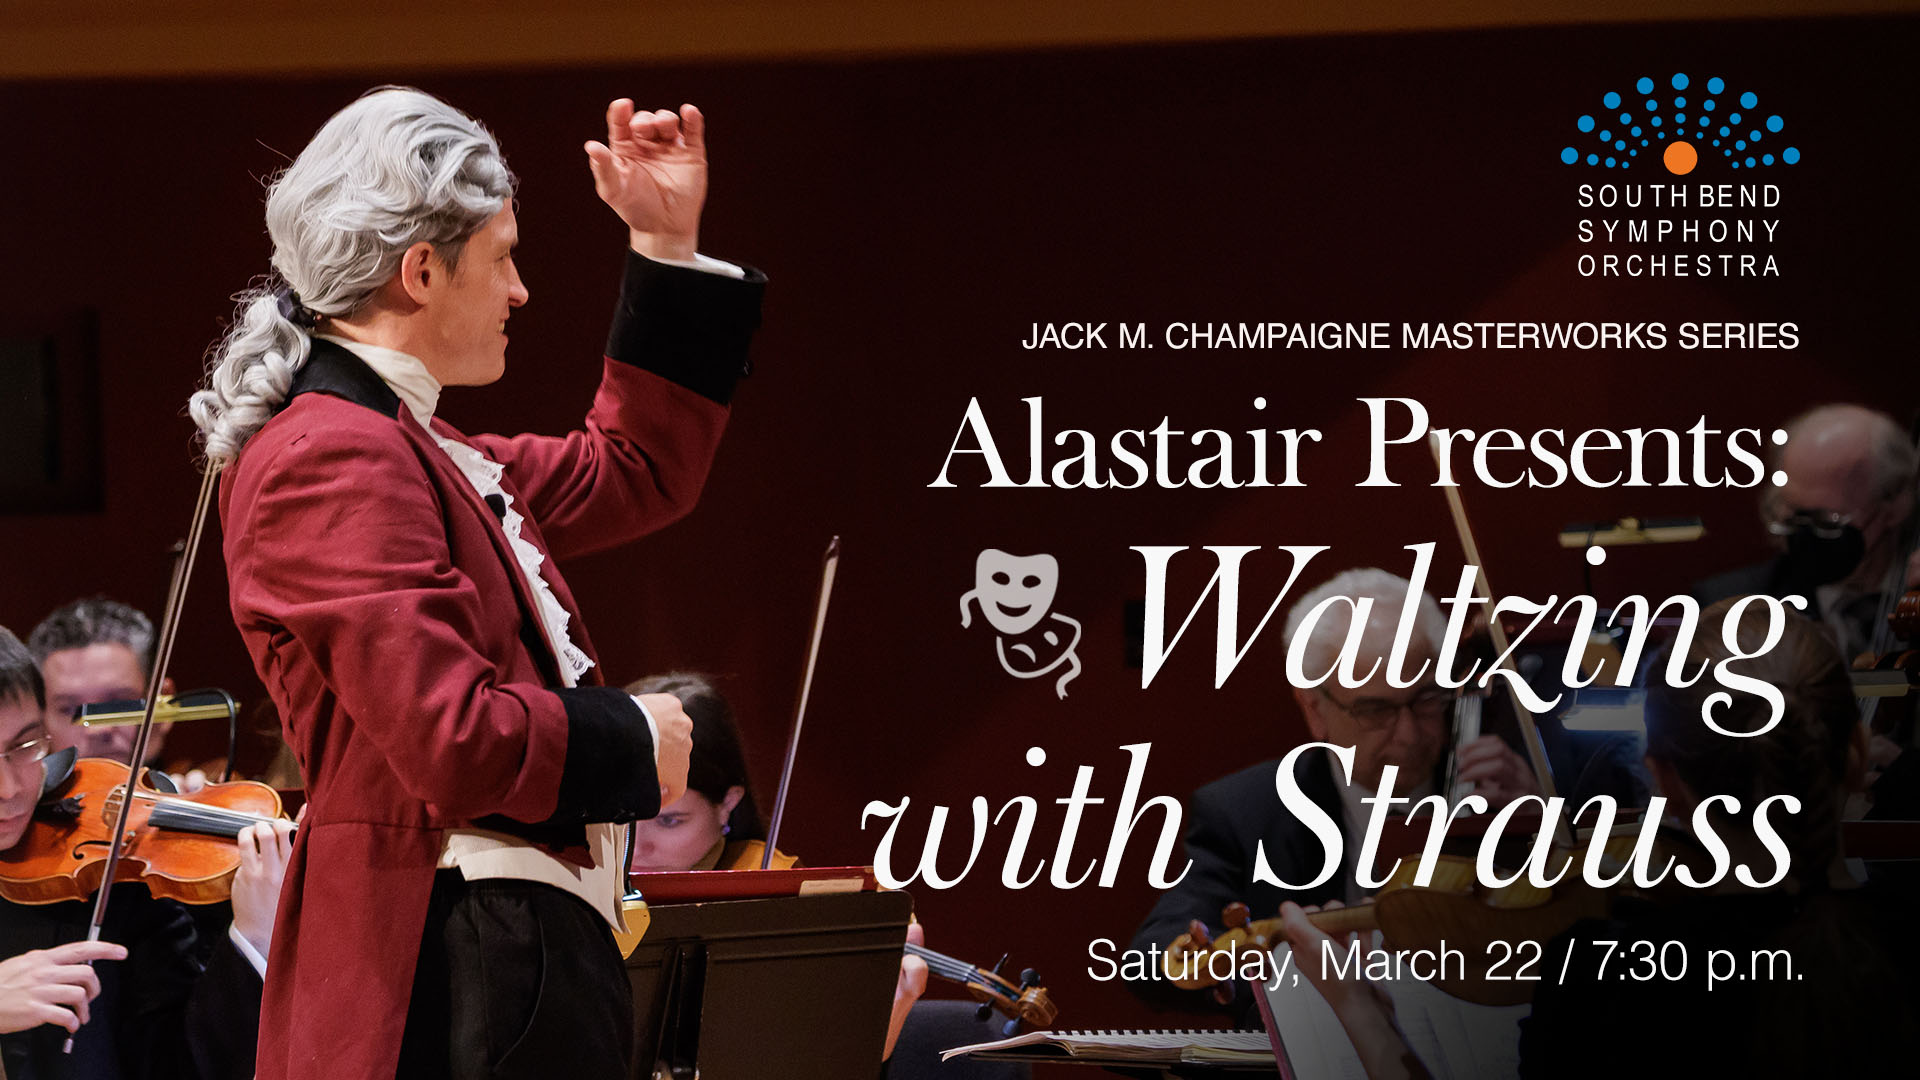 Waltzing with strauss banner